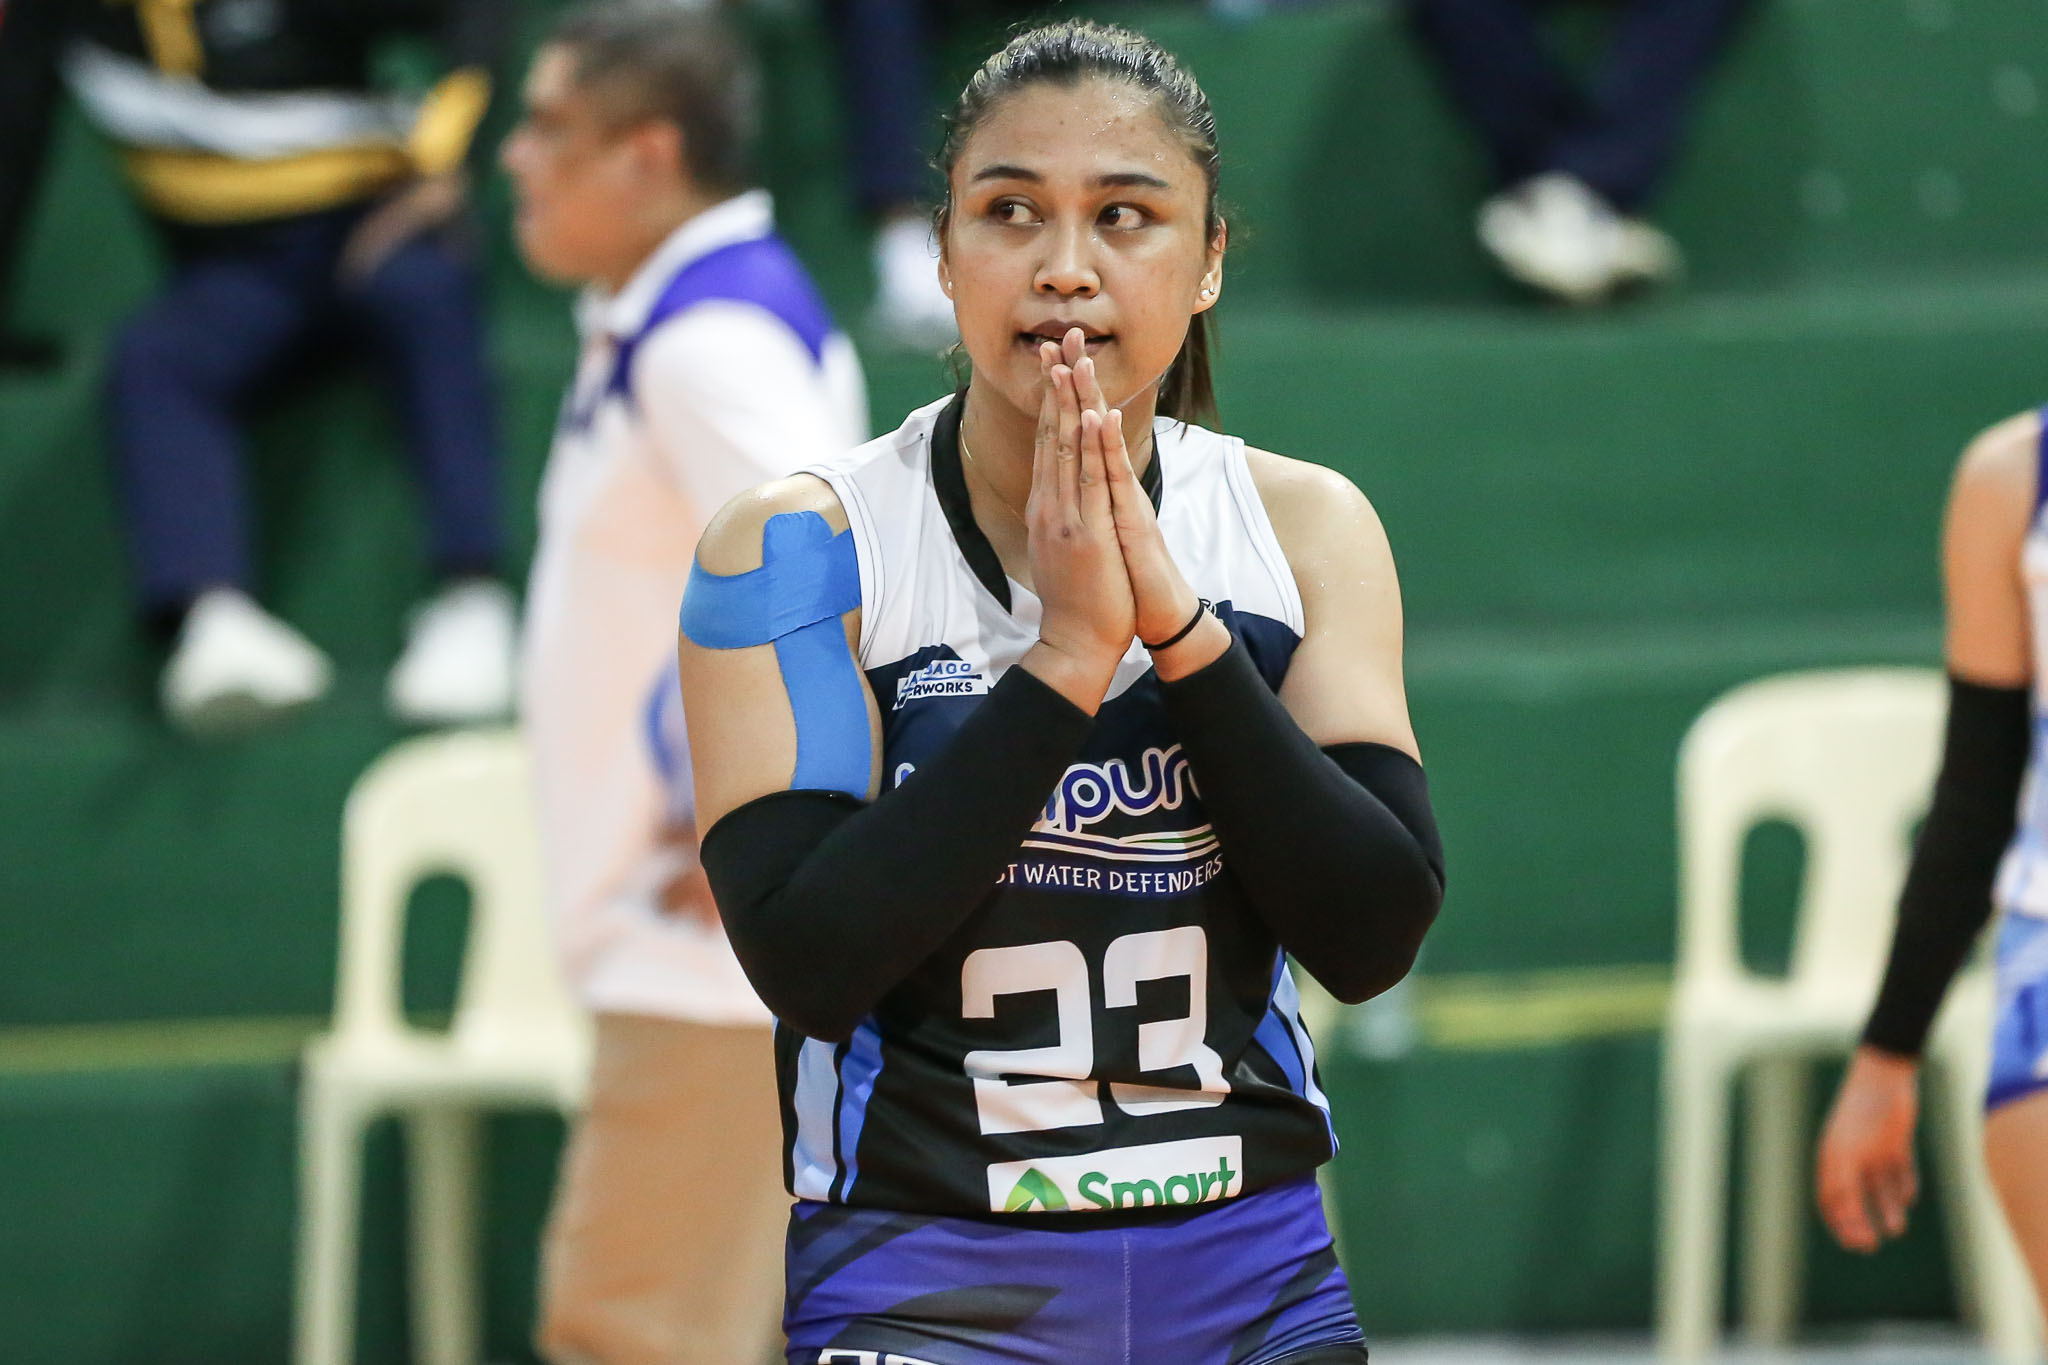 2021-PVL-Open-BaliPure-vs-Chery-Tiggo-Grace-Bombita After valiant campaign, BaliPure confident it can get over hump next time News PVL Volleyball  - philippine sports news